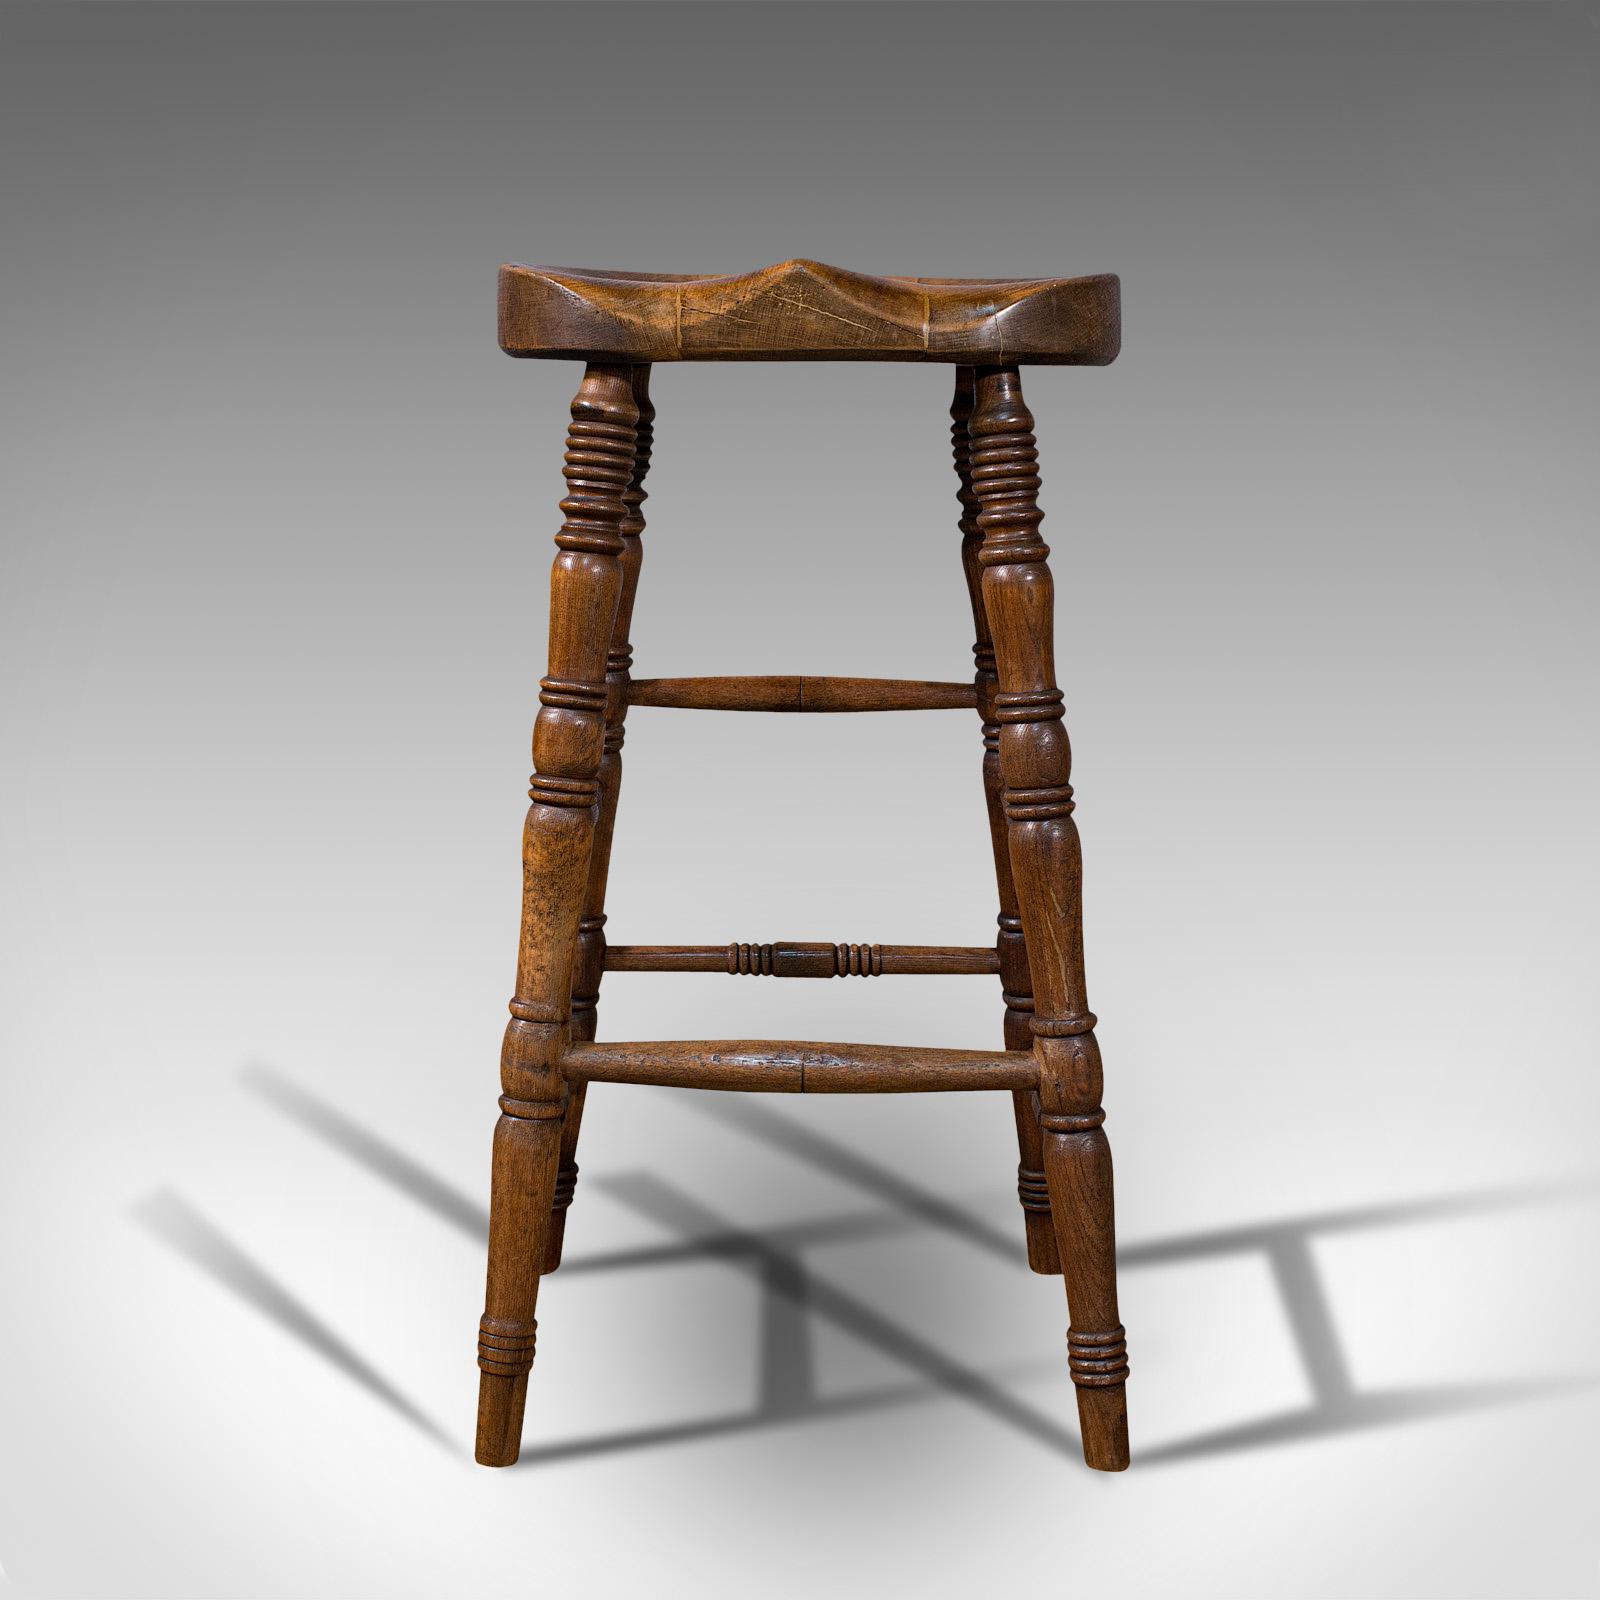 This is an antique artist's stool. An English, beech saddle seat, dating to the late Victorian period, circa 1900.

Of useful, classic form with appealing craftsmanship
Displays a desirable aged patina throughout
Beech seat shows fine grain